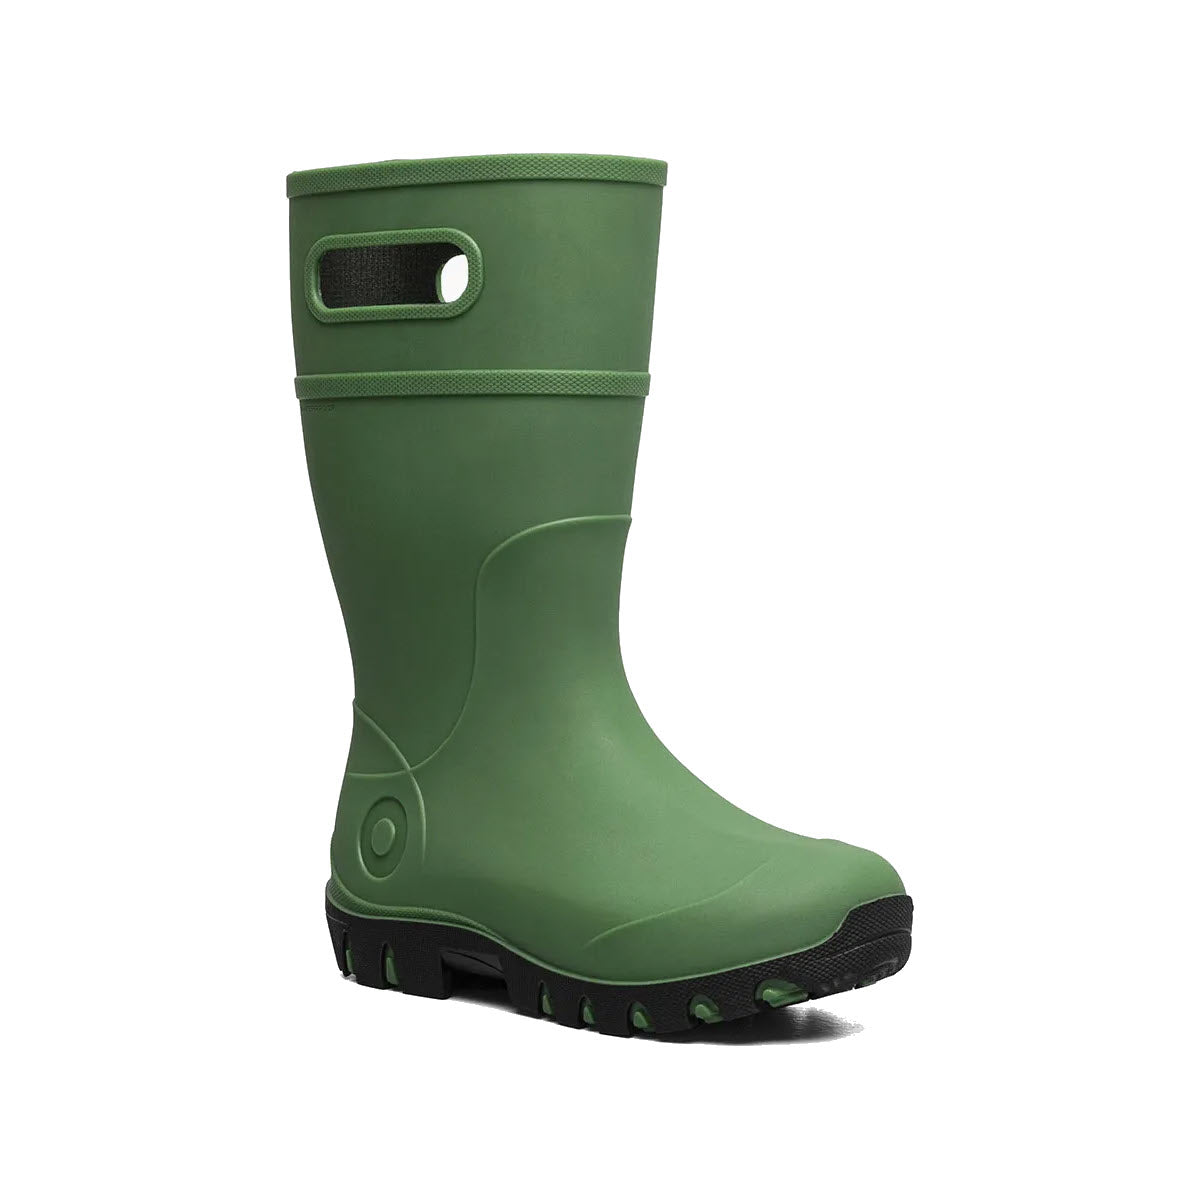 The Bogs Essential Rain Tall Grass - Kids boot is isolated on a white background, featuring a reinforced heel, space-age seamless construction, and a pull-on handle at the top.